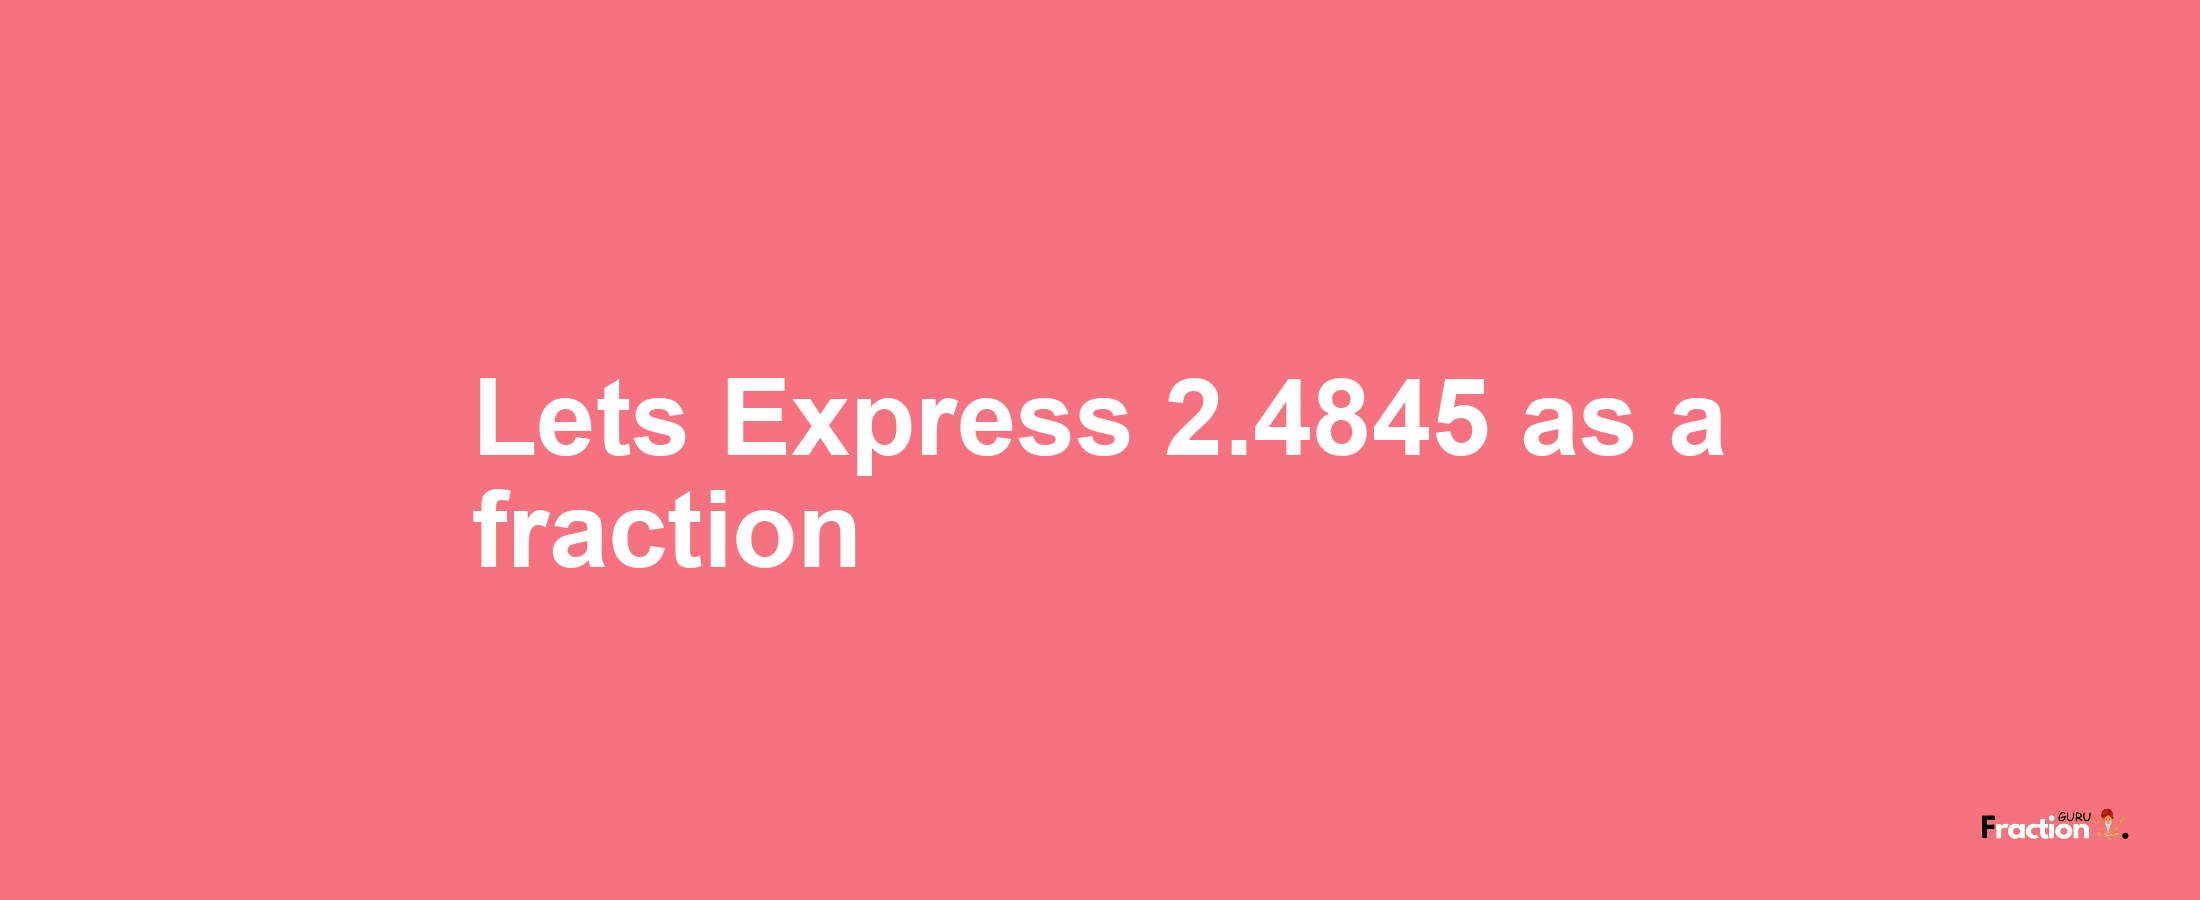 Lets Express 2.4845 as afraction